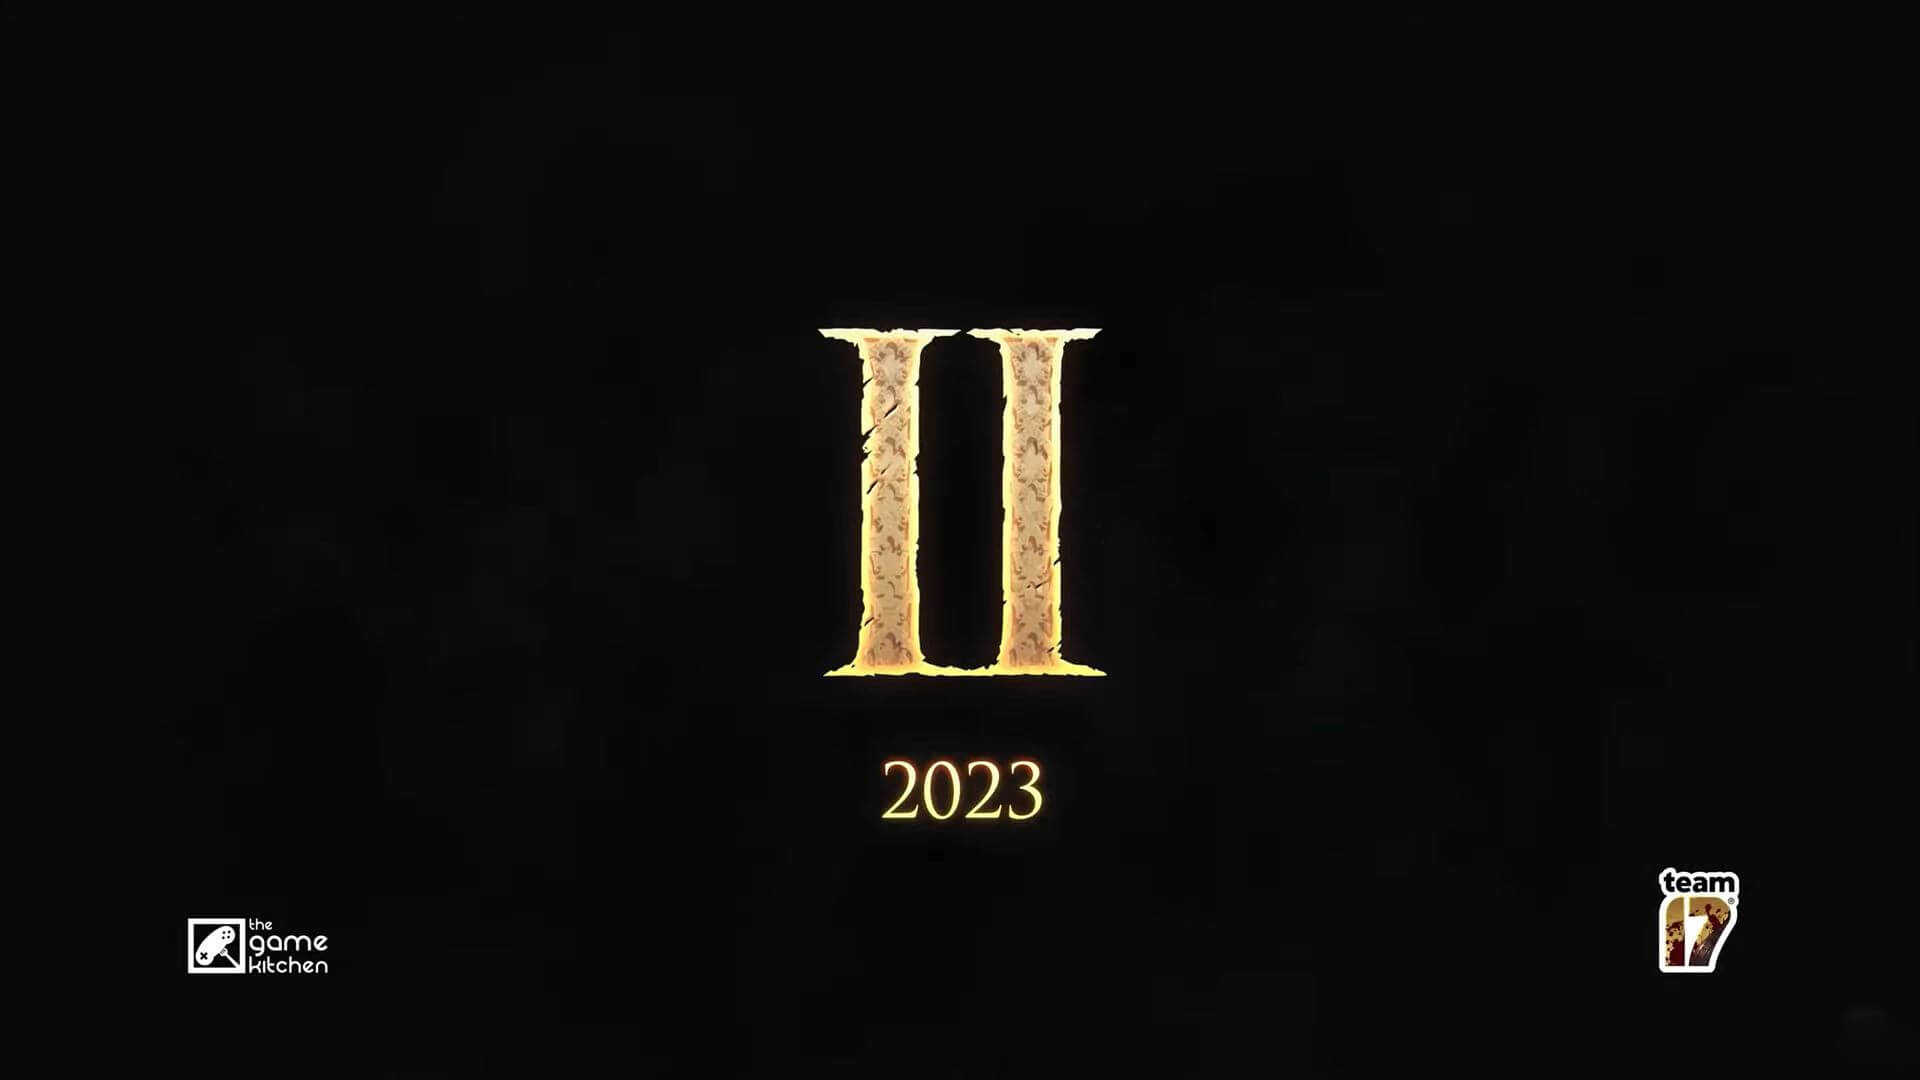 The mysterious "II" logo at the end of the Blasphemous free DLC trailer